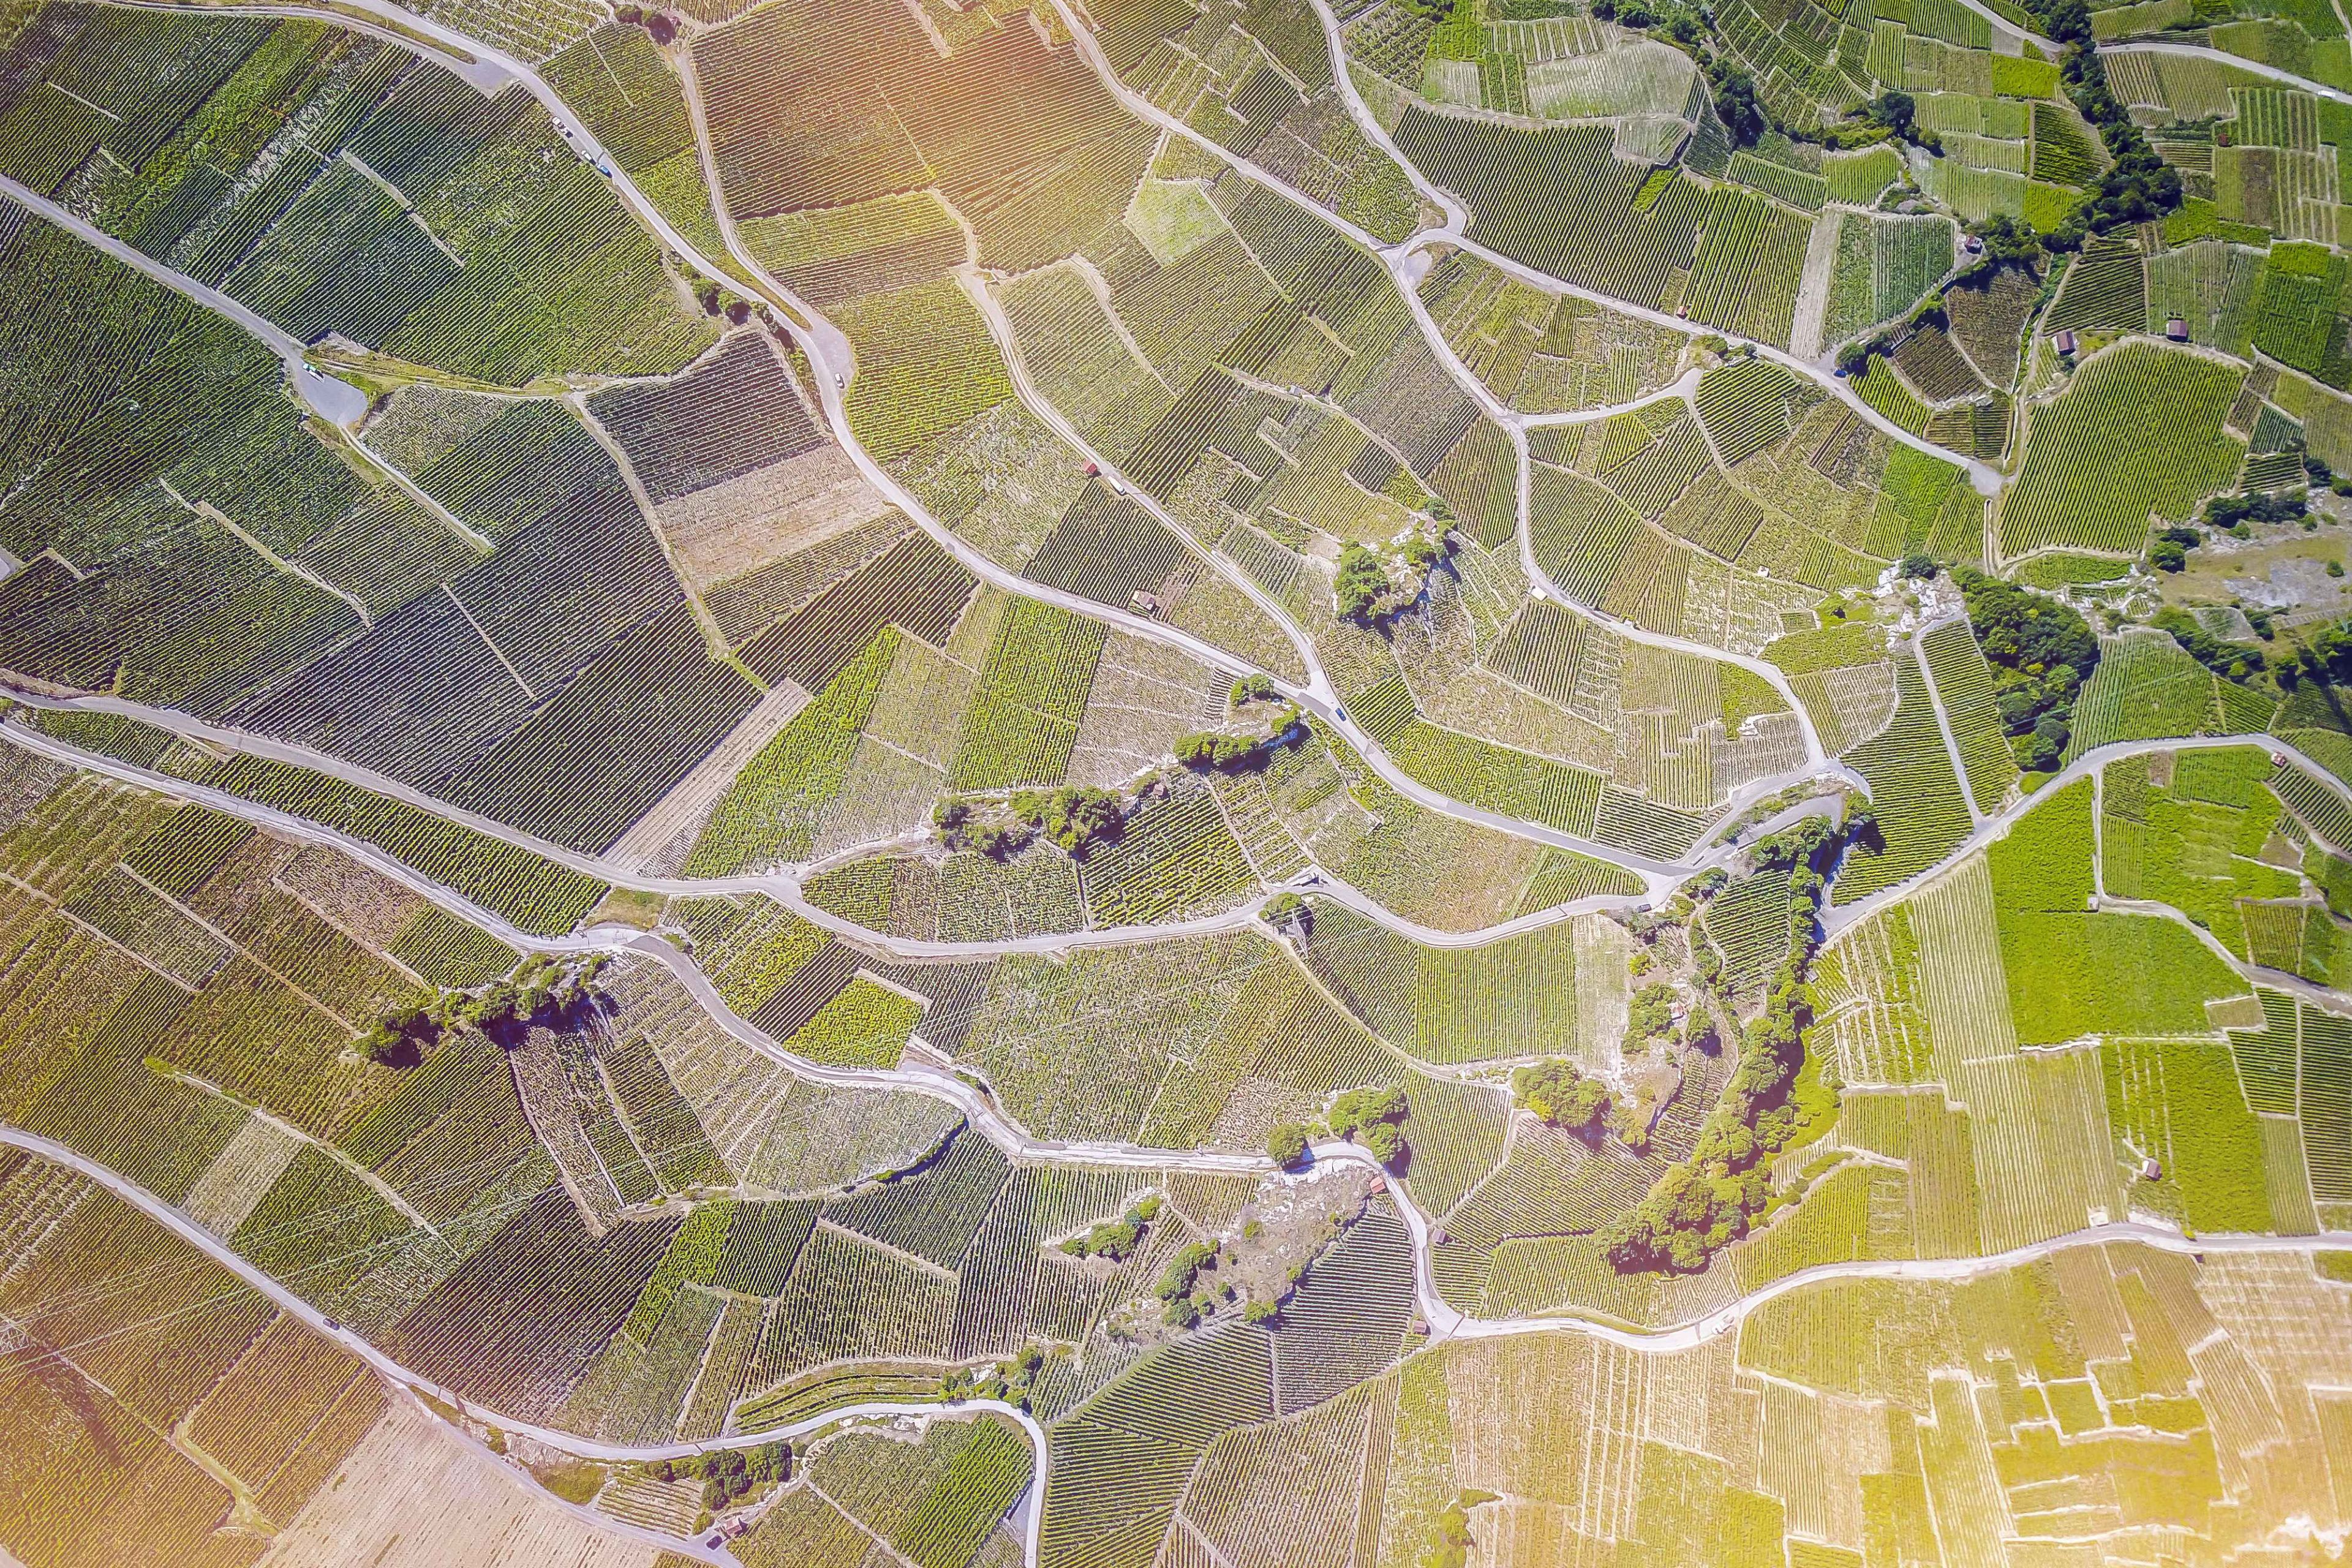 Aerial view of the Valais vineyard with the different plots, Valais Switerland